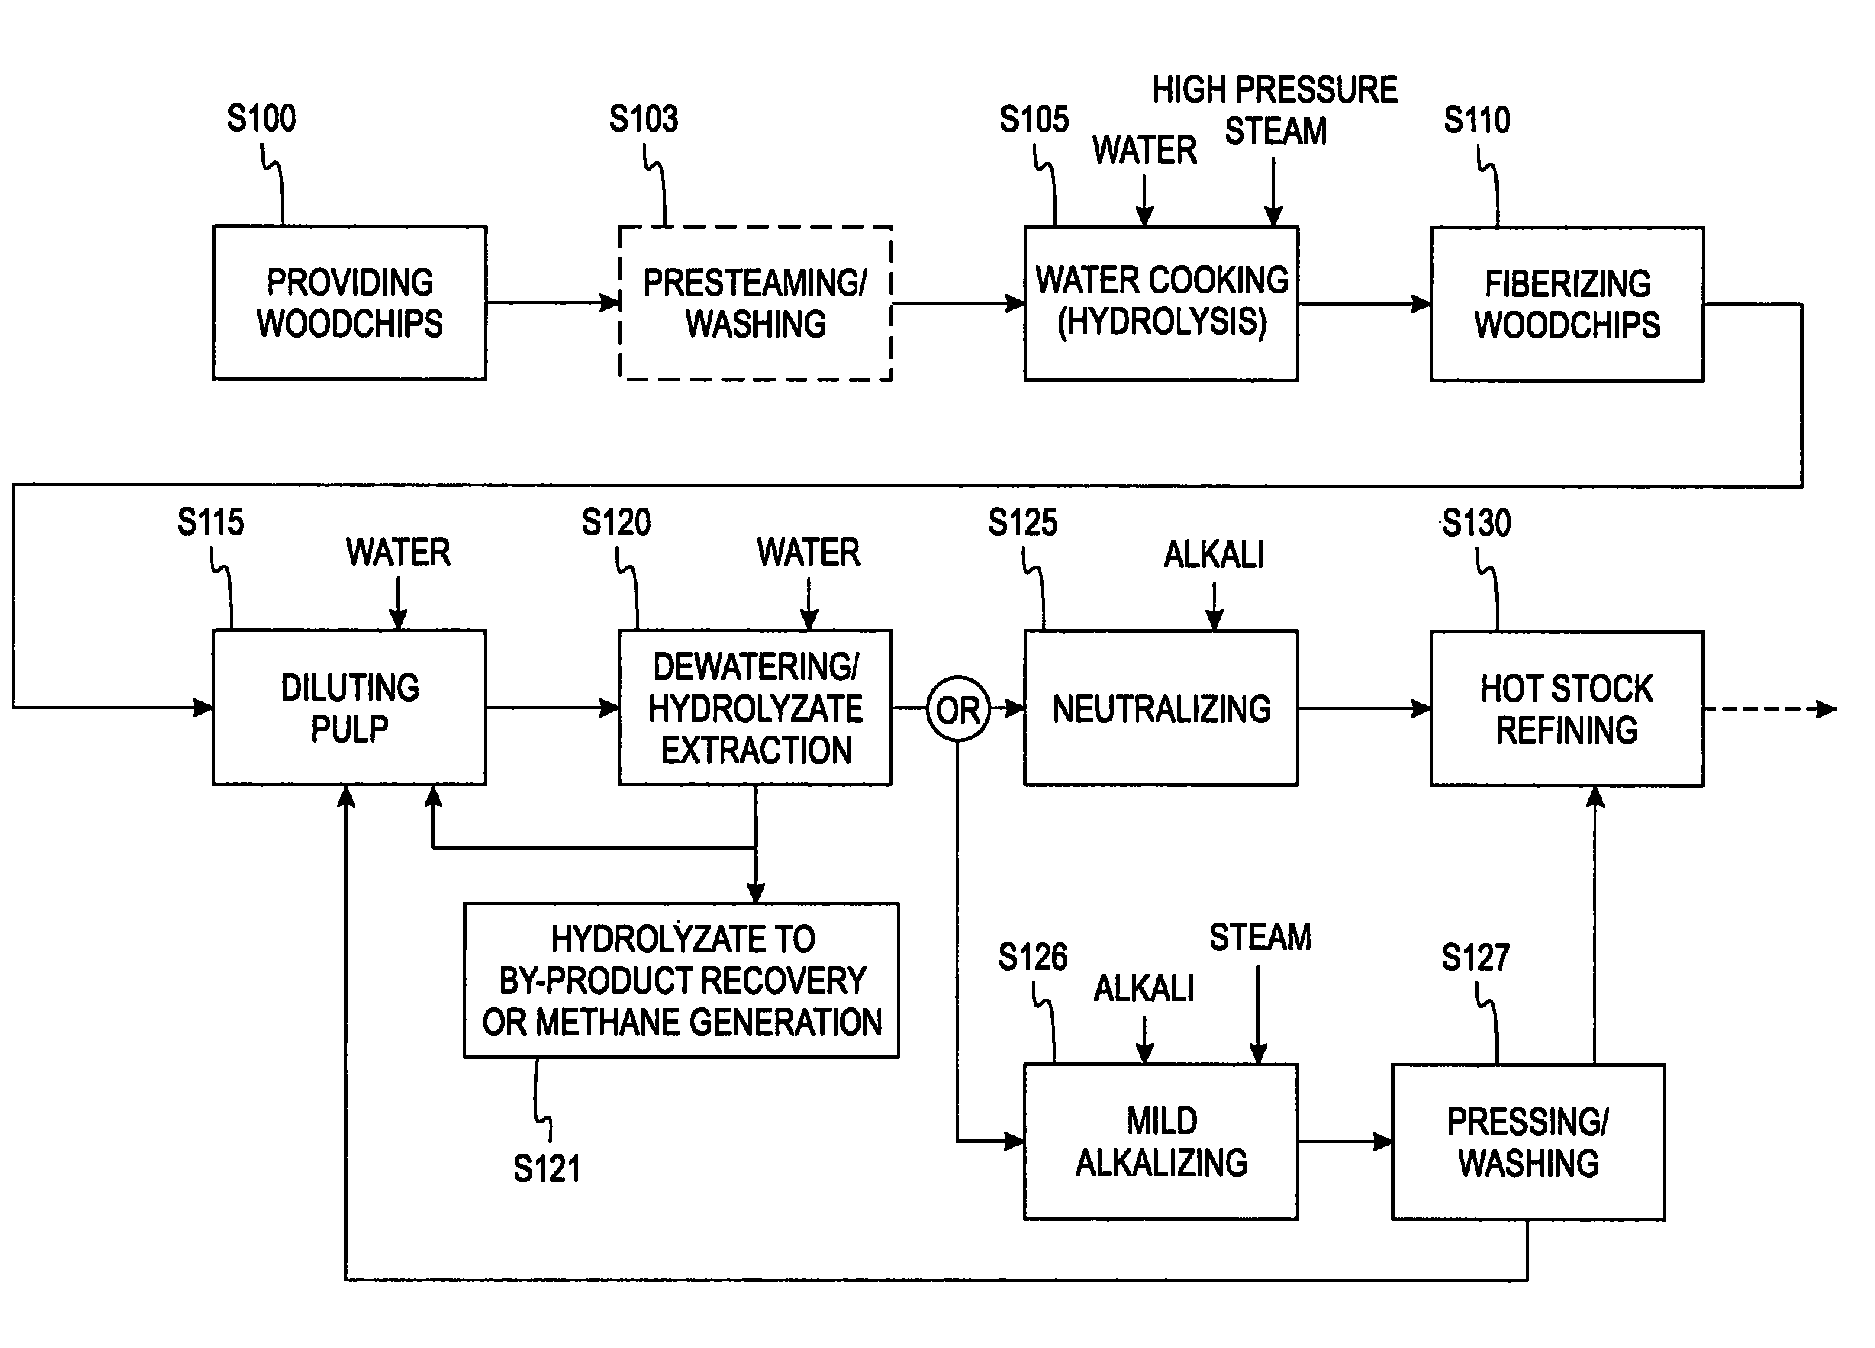 Method of pre-treating woodchips prior to mechanical pulping